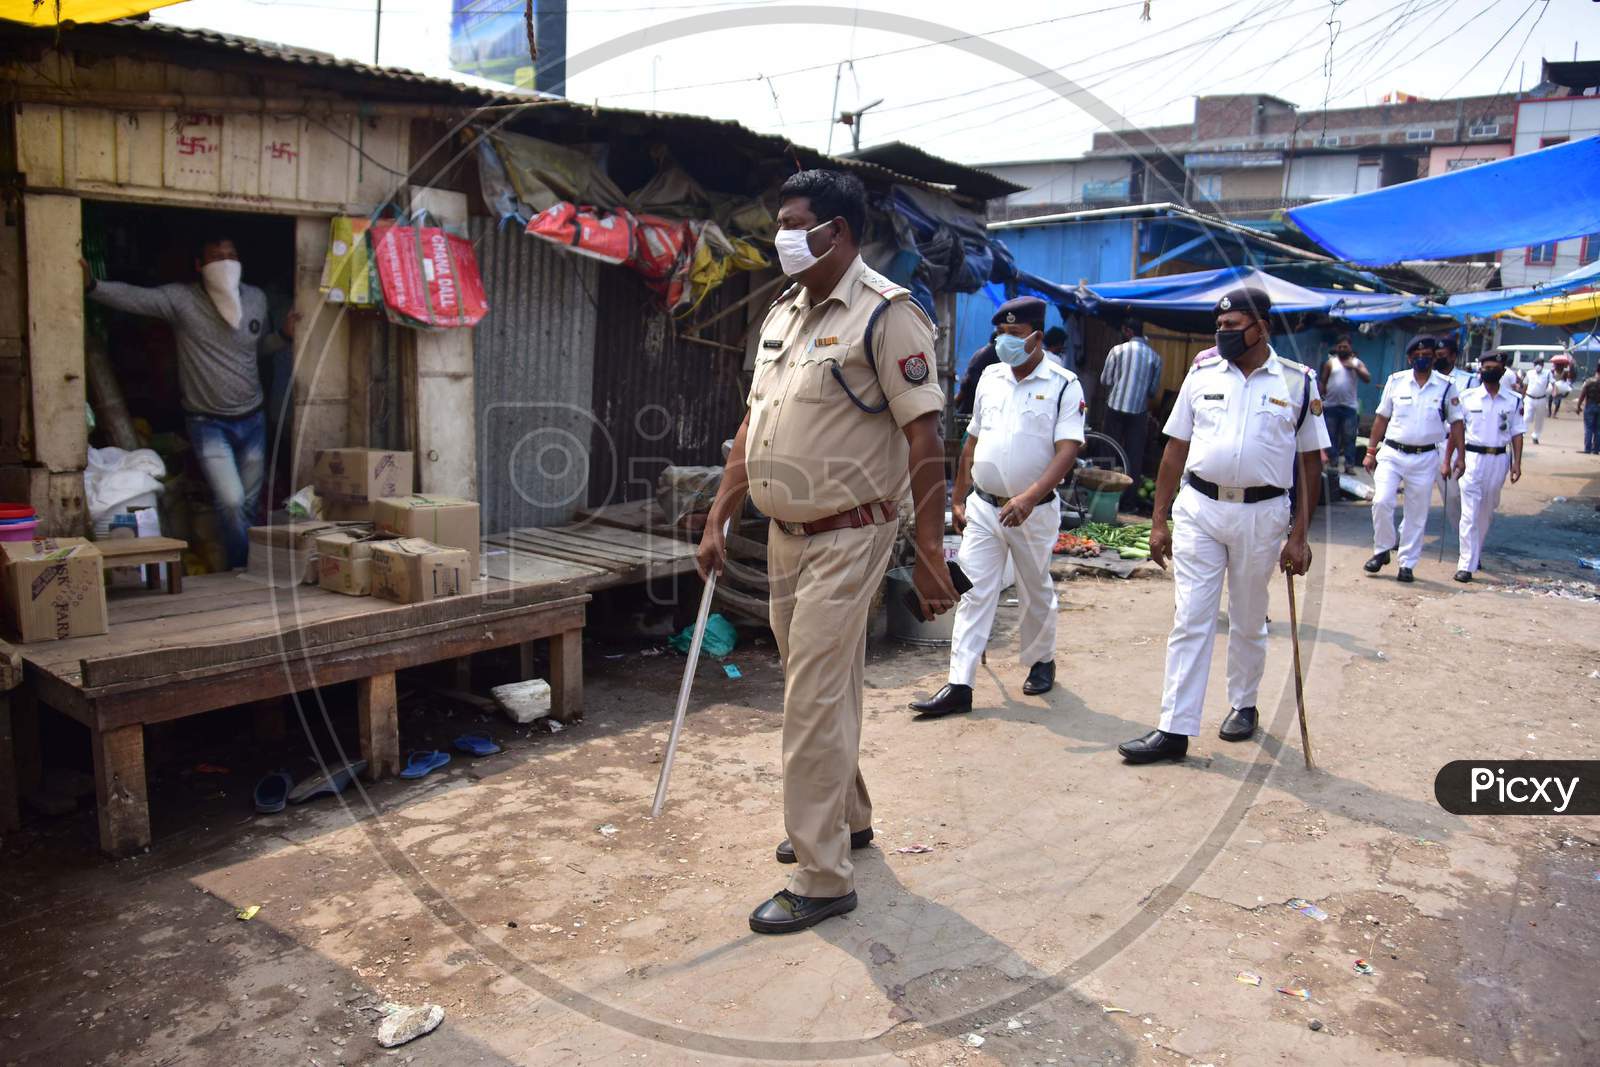 Police Personnel Patrol Through Barbazar Market Asking Vendors To Shut Their Stalls During The Third  Day Of National Lockdown Imposed By Pm Narendra Modi To Curb The Spread Of Coronavirus In Nagaon District Of Assam ,India